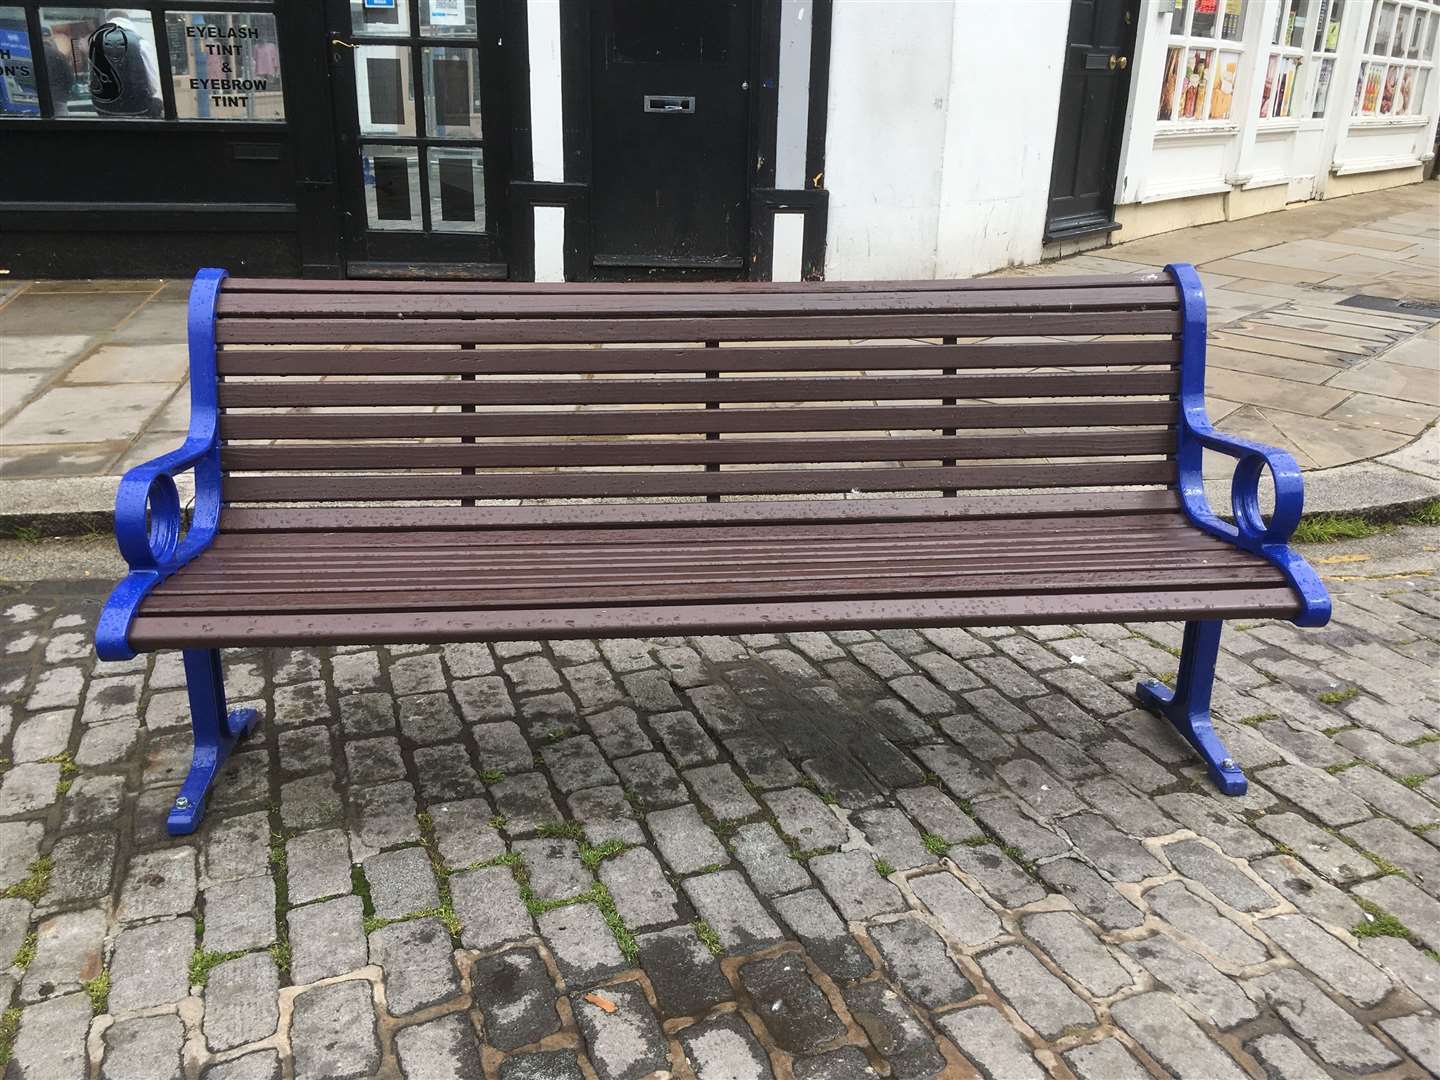 One of the refurbished benches at Sheerness clock tower